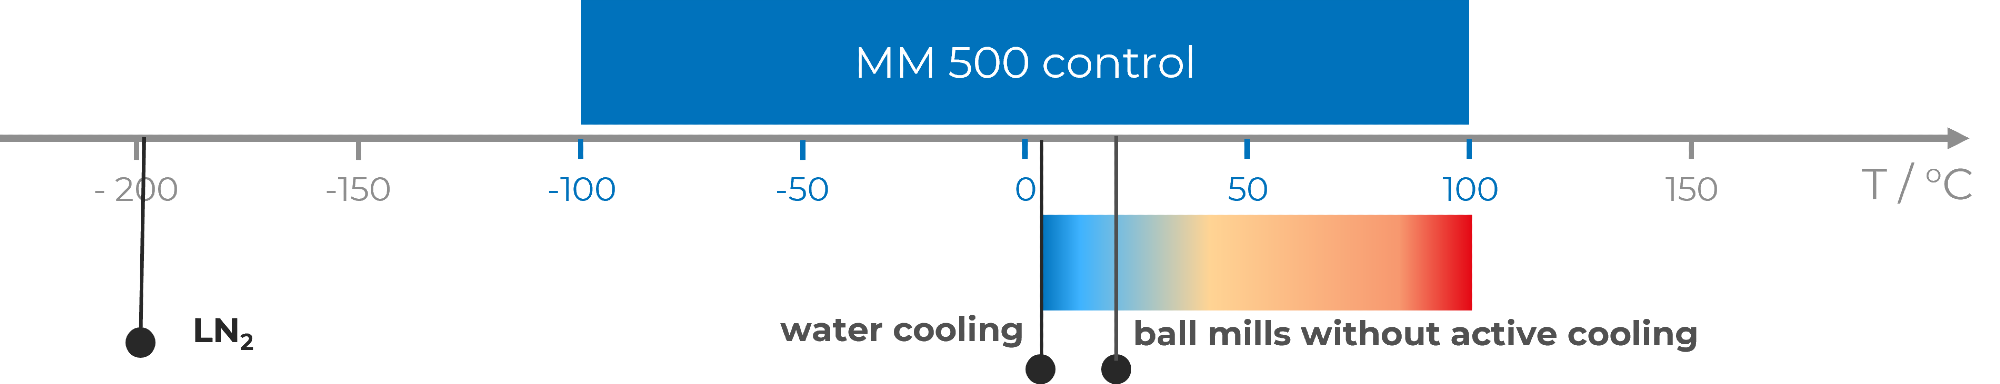 MM 500 control and its operating temperature range, related to the field of ball mills with water cooling, without cooling or cooling with liquid nitrogen.